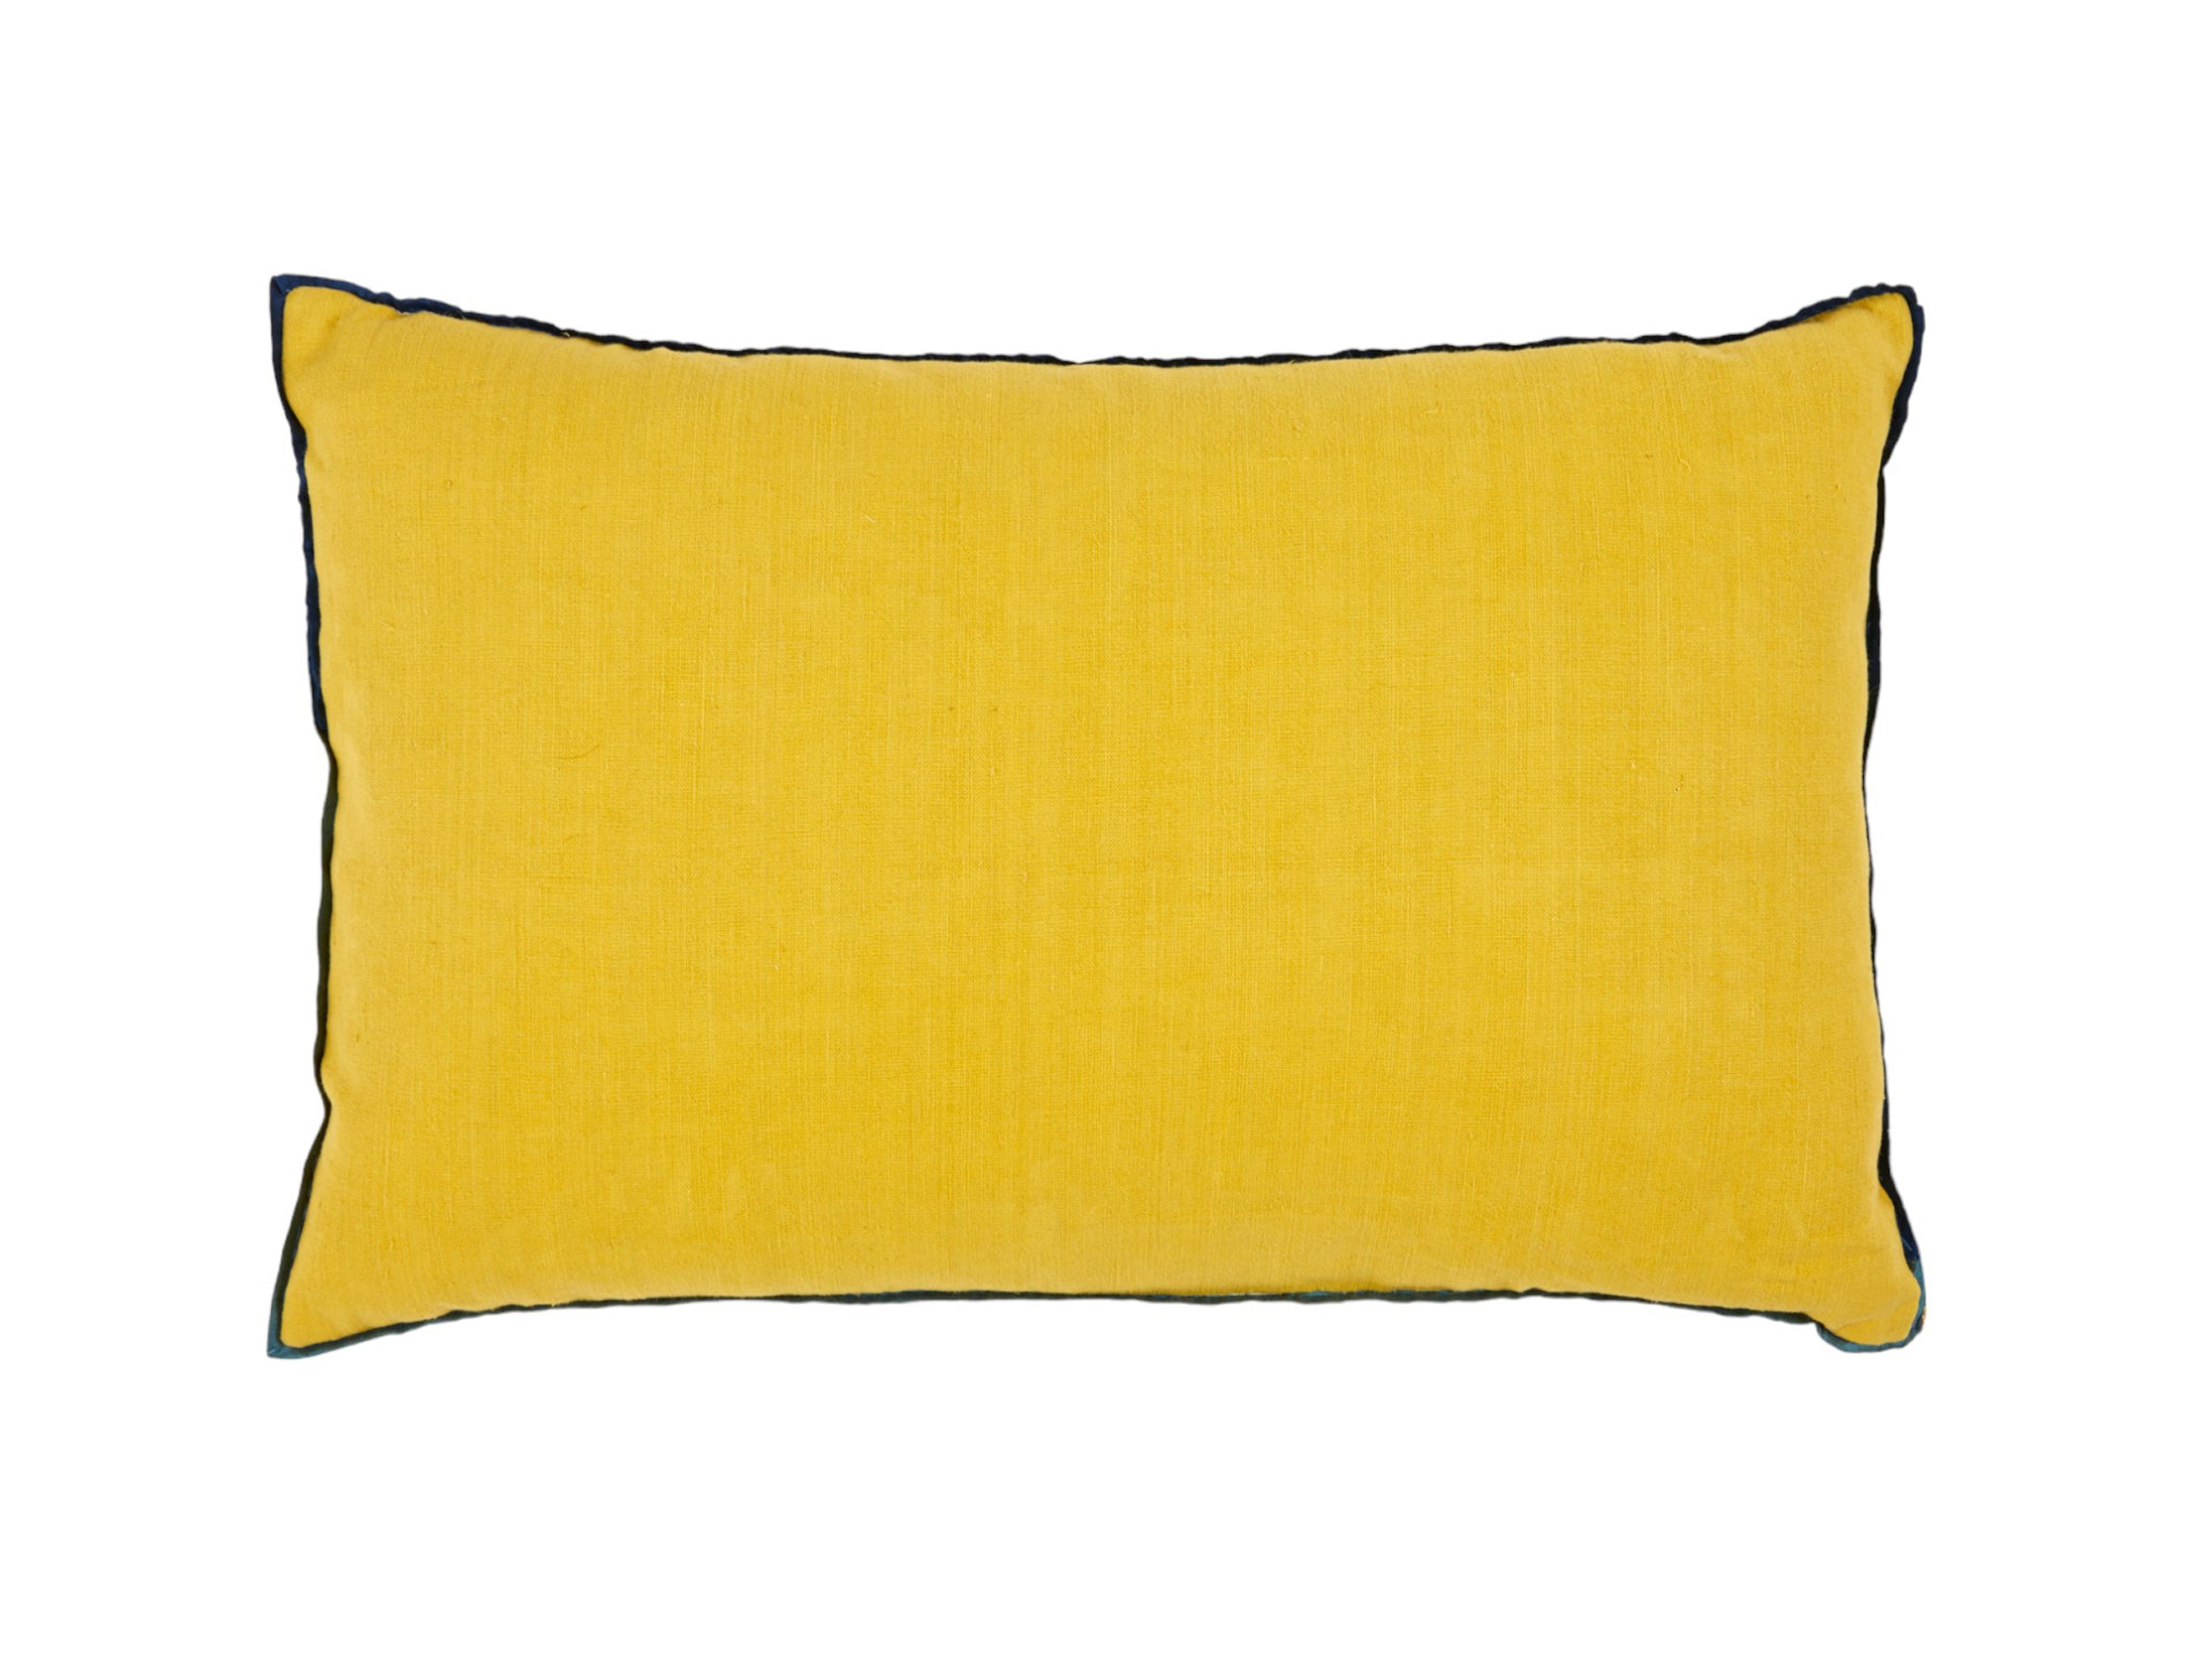 A Pair of Oblong cushions in Vivid Yellow Damask